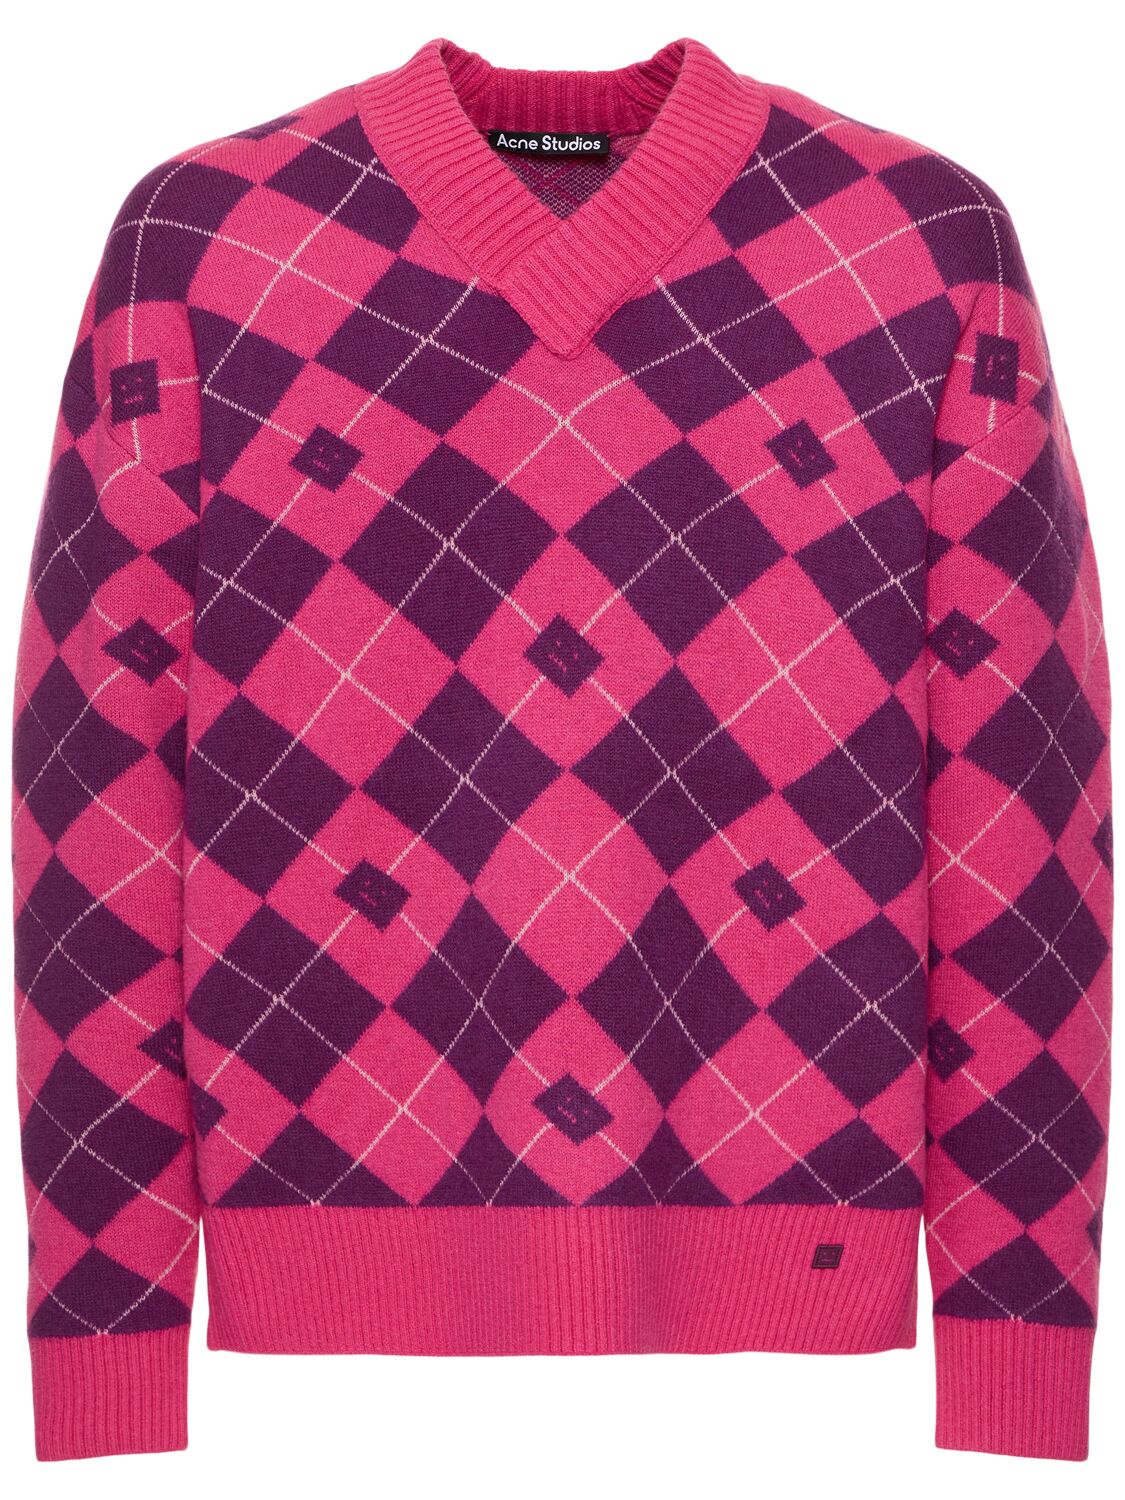 Acne Studios Kwan Wool Blend Knit V Neck Sweater In Bright Pink